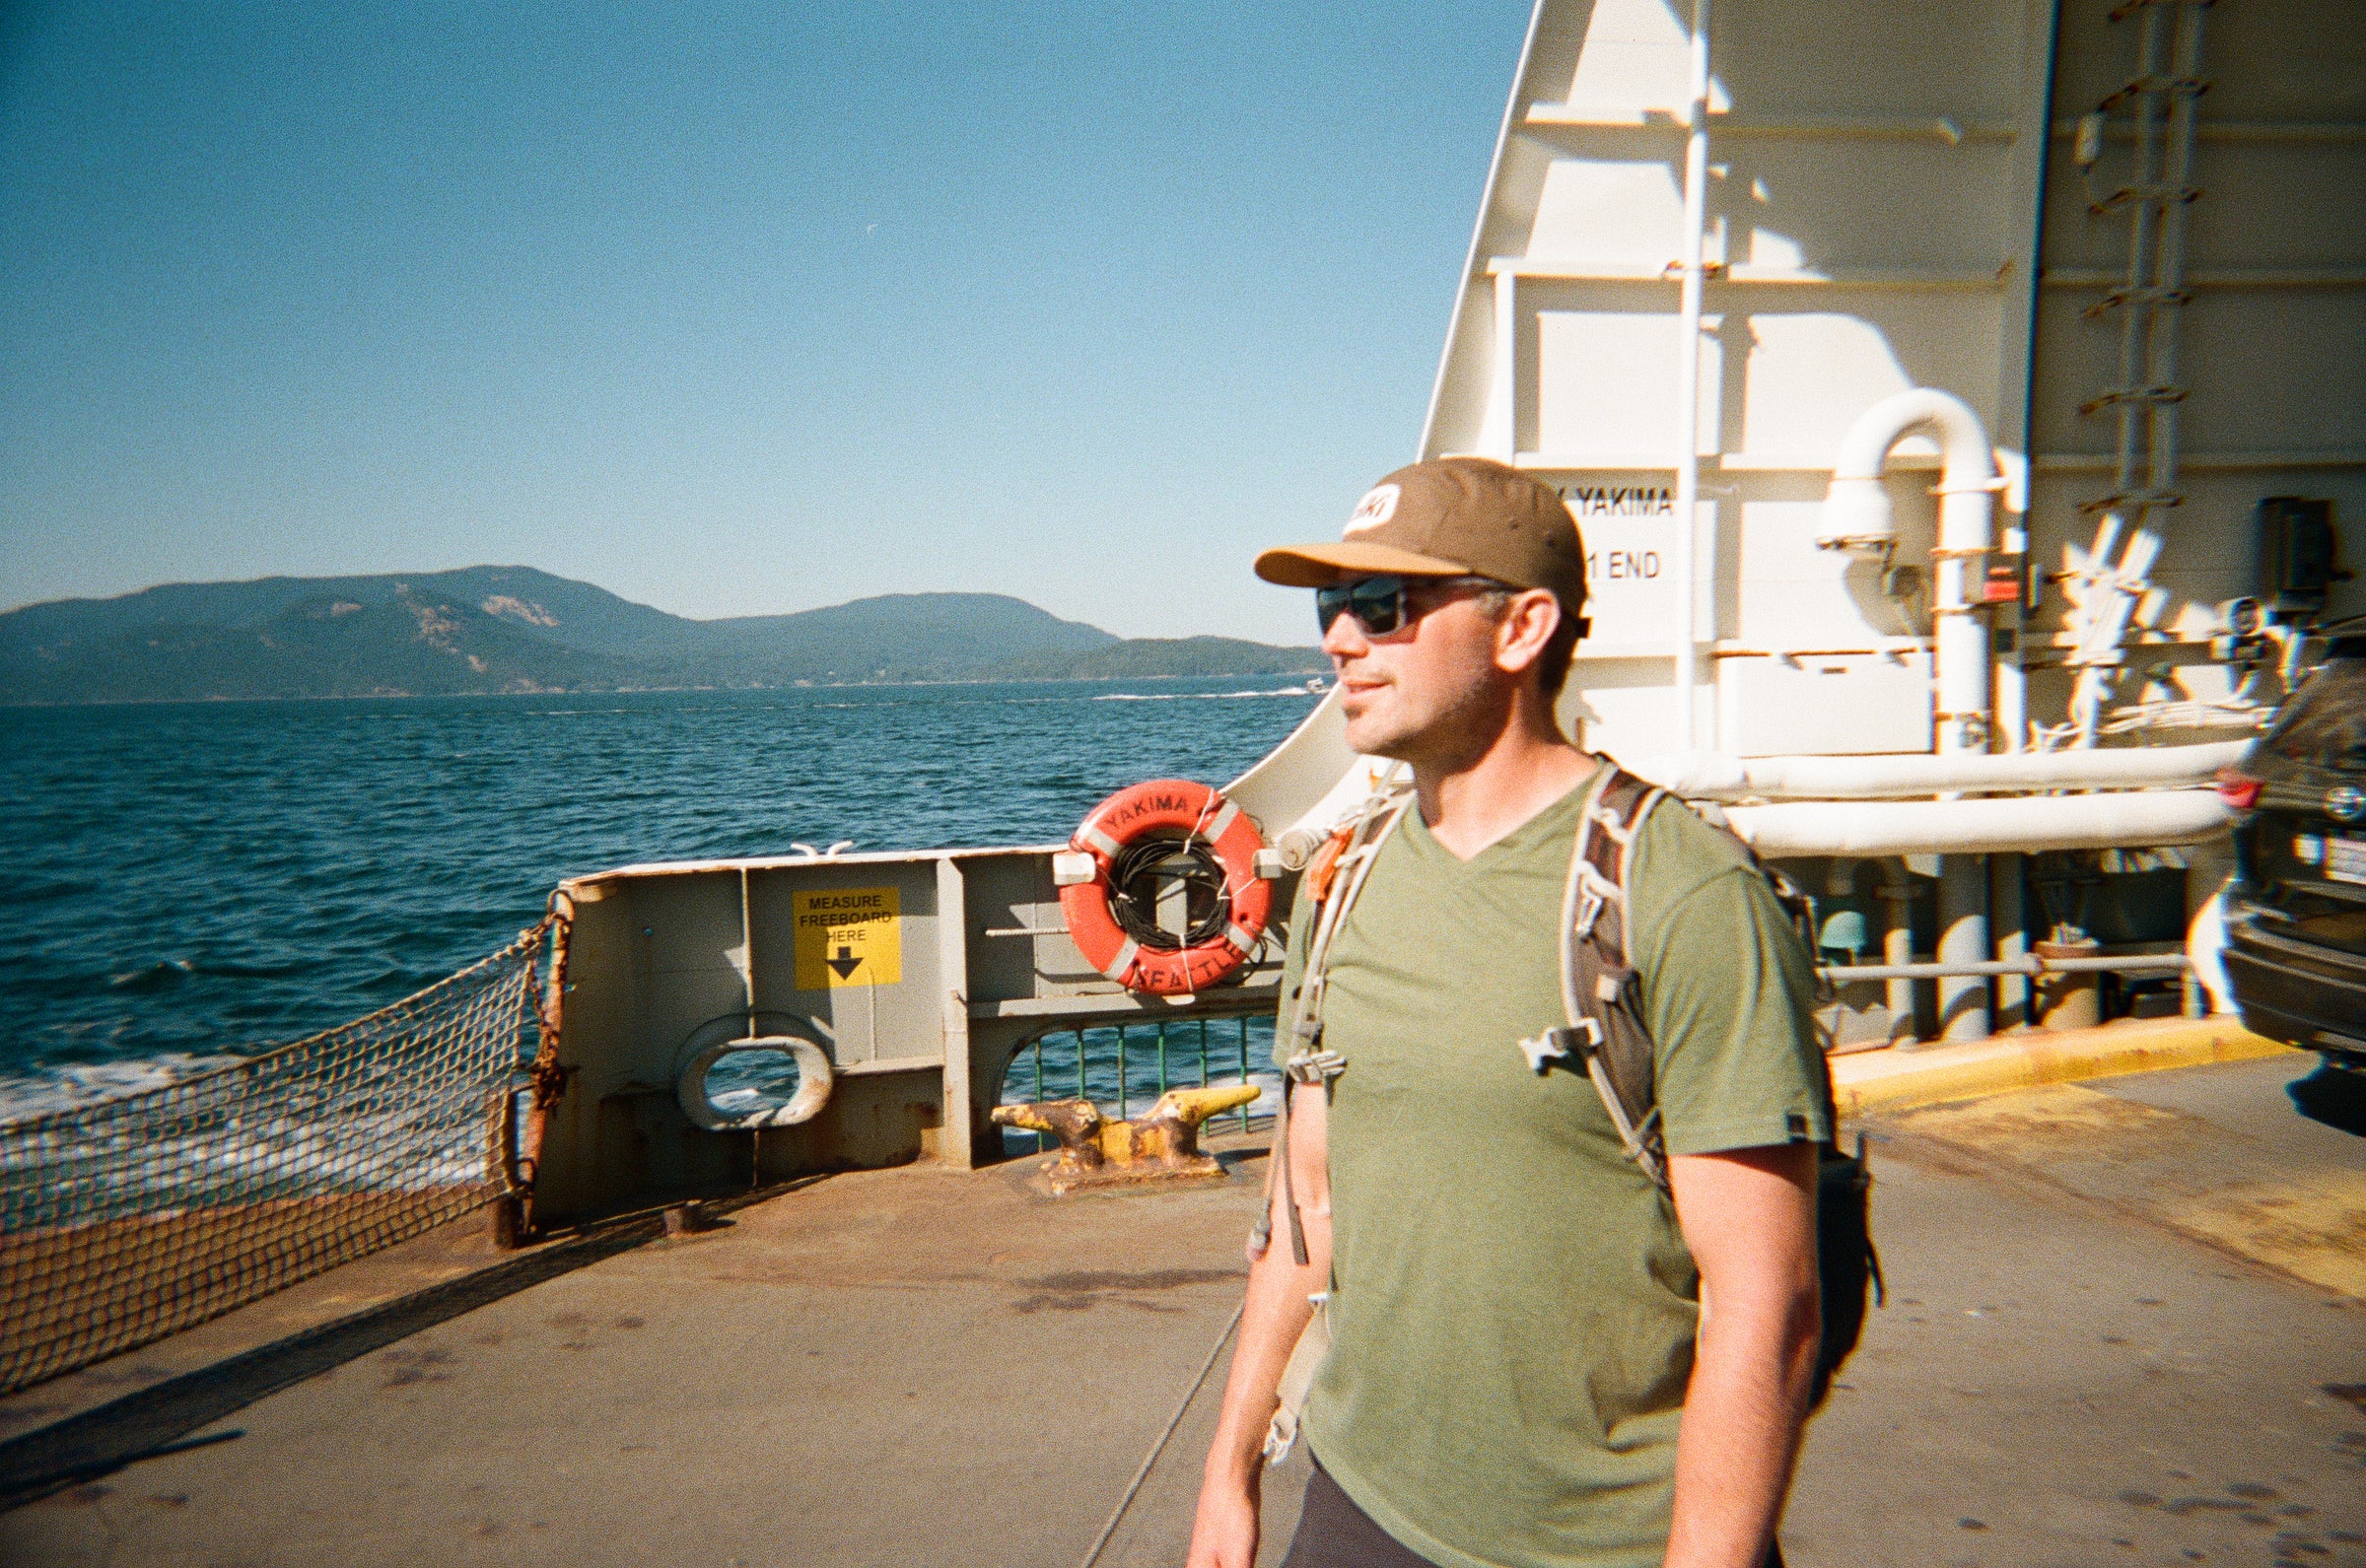 Nick wearing his Alki Supply hat on the ferry back to Anacortes